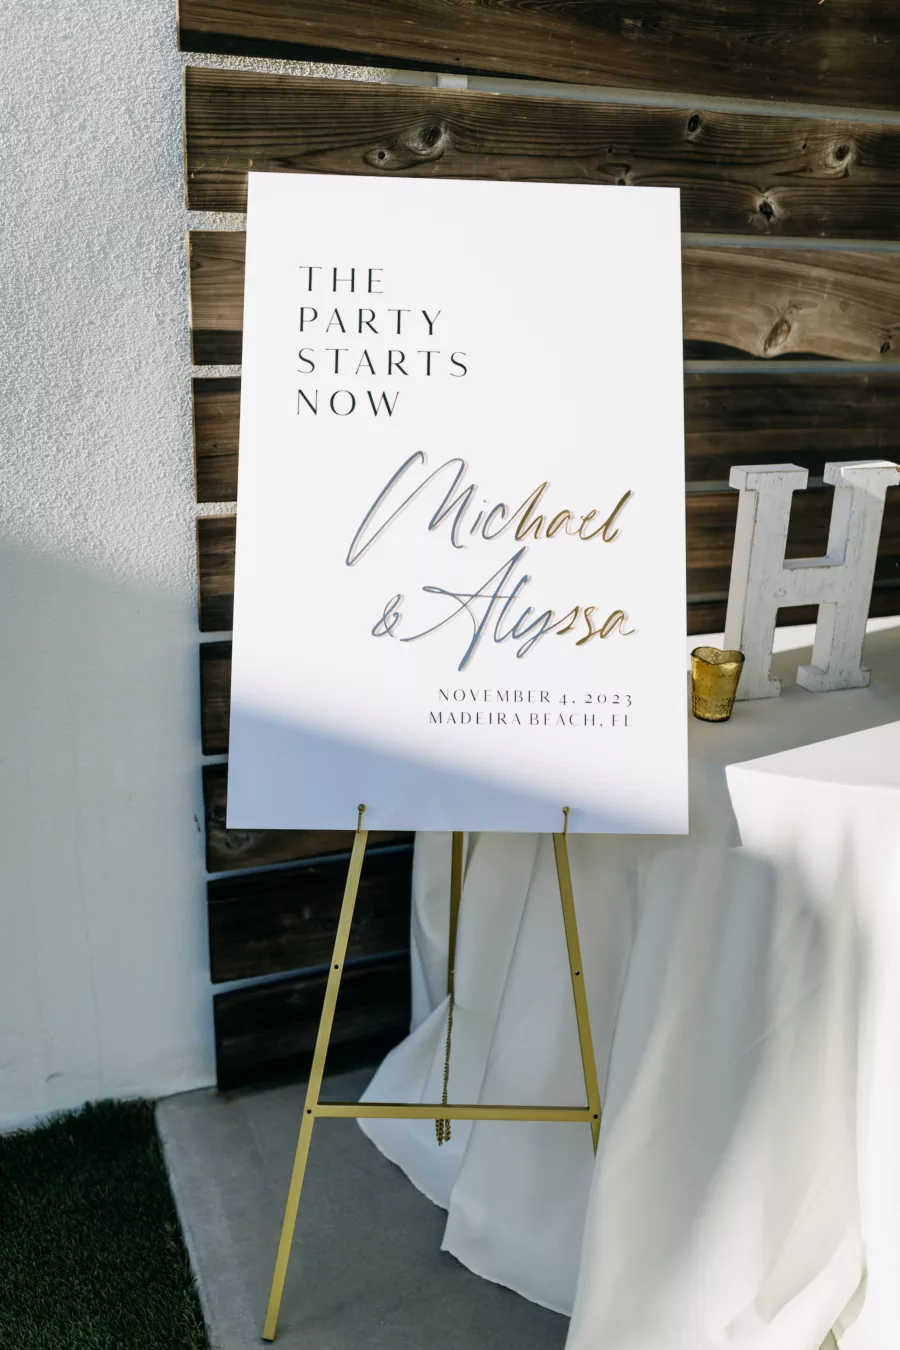 Elegant The Party Starts Now Welcome Wedding Sign Ideas